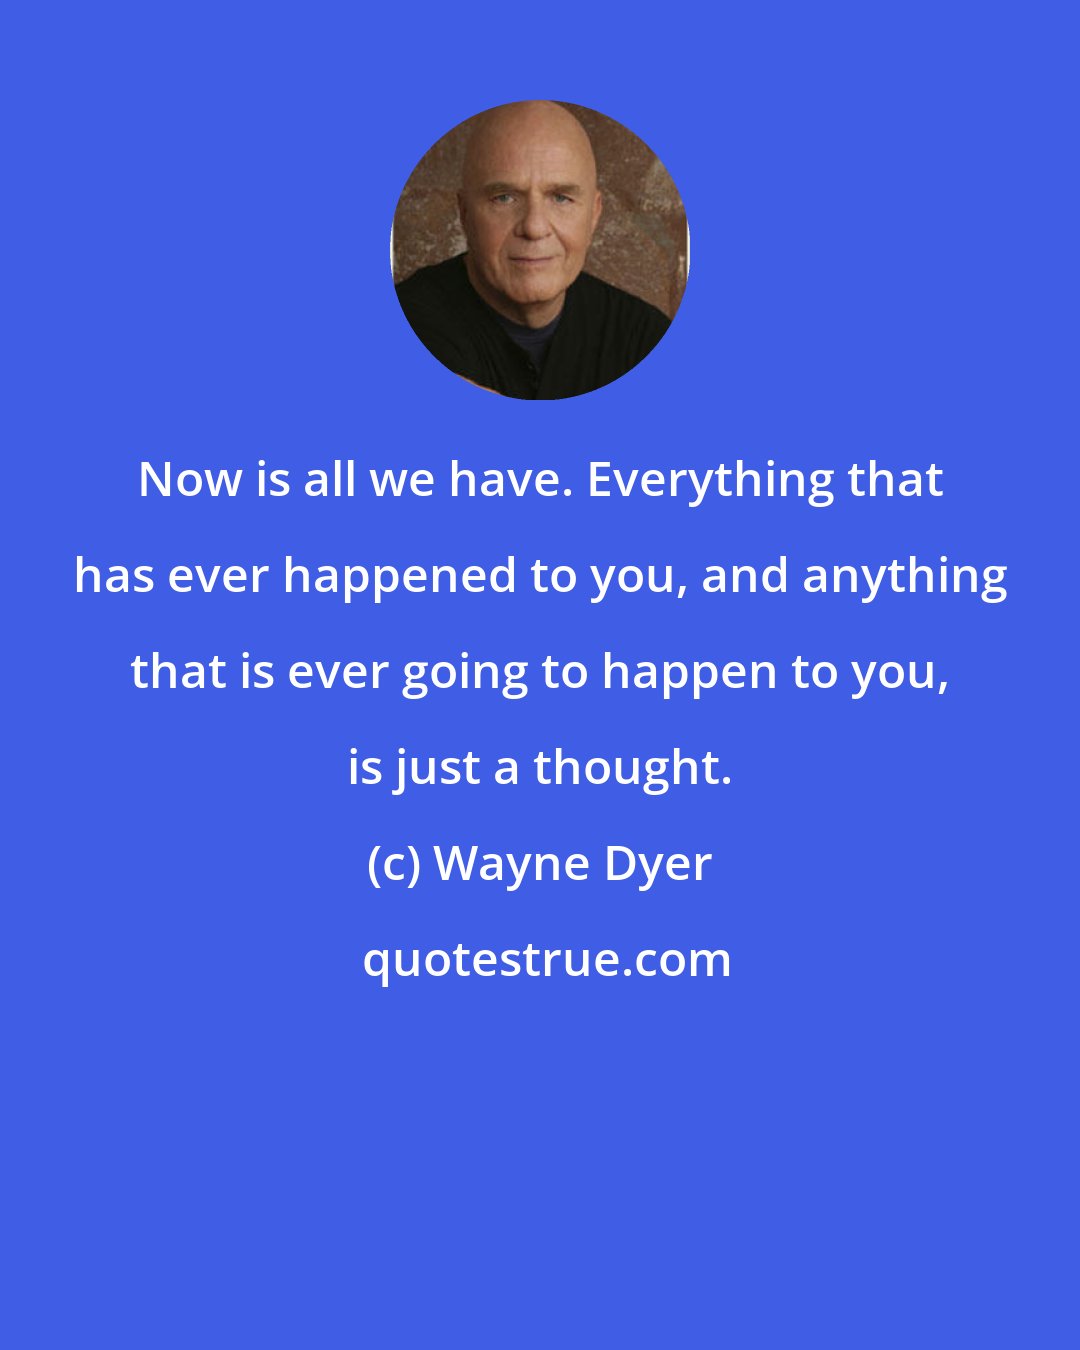 Wayne Dyer: Now is all we have. Everything that has ever happened to you, and anything that is ever going to happen to you, is just a thought.